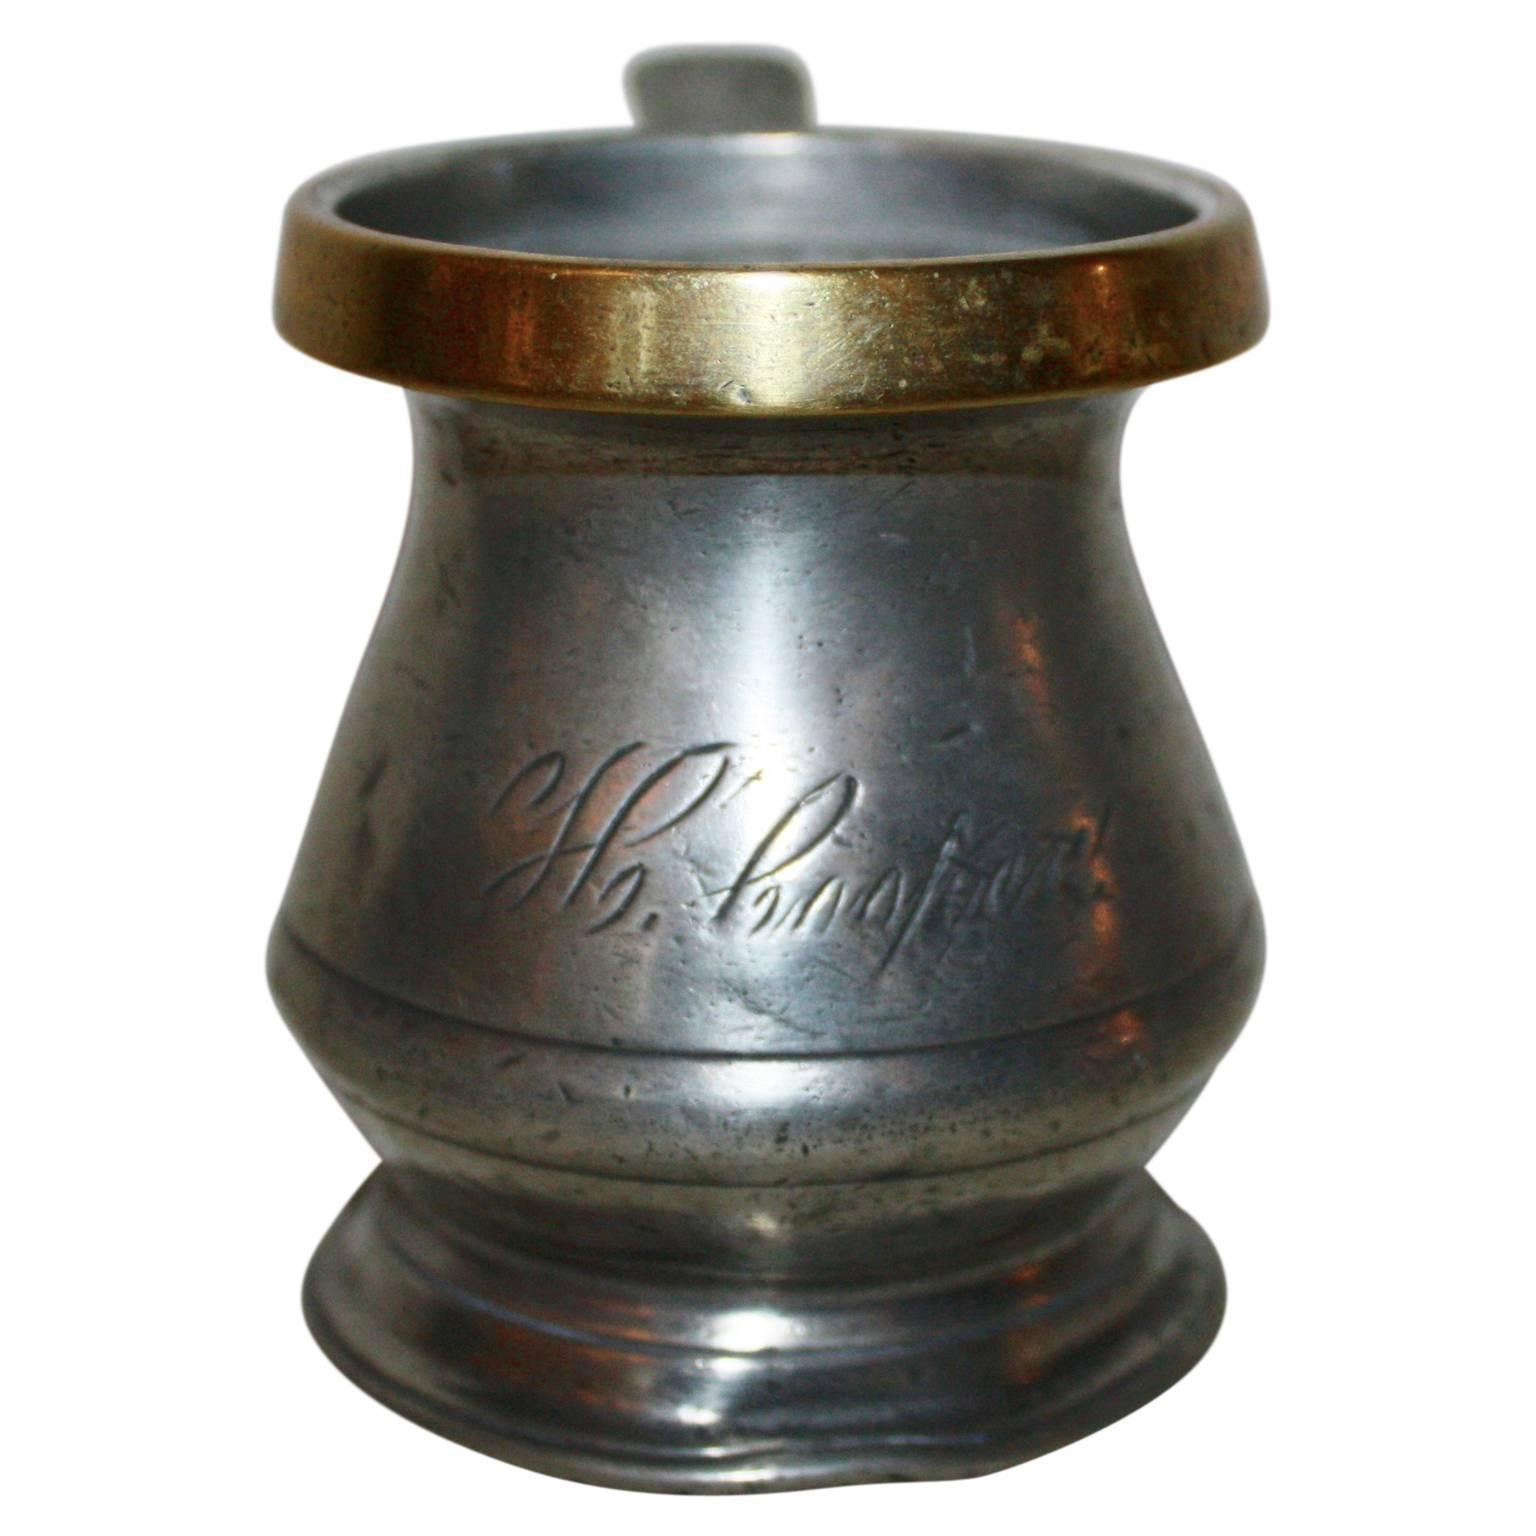 This is a Victorian liquid bellied lidless, Gill measurer with a brass rim and inscription of the owner.
A capacity mark such as ‘pint’ or ‘quart’ is self explanatory. Such marks became a legal requirement in 1836 in England. The presence of such a